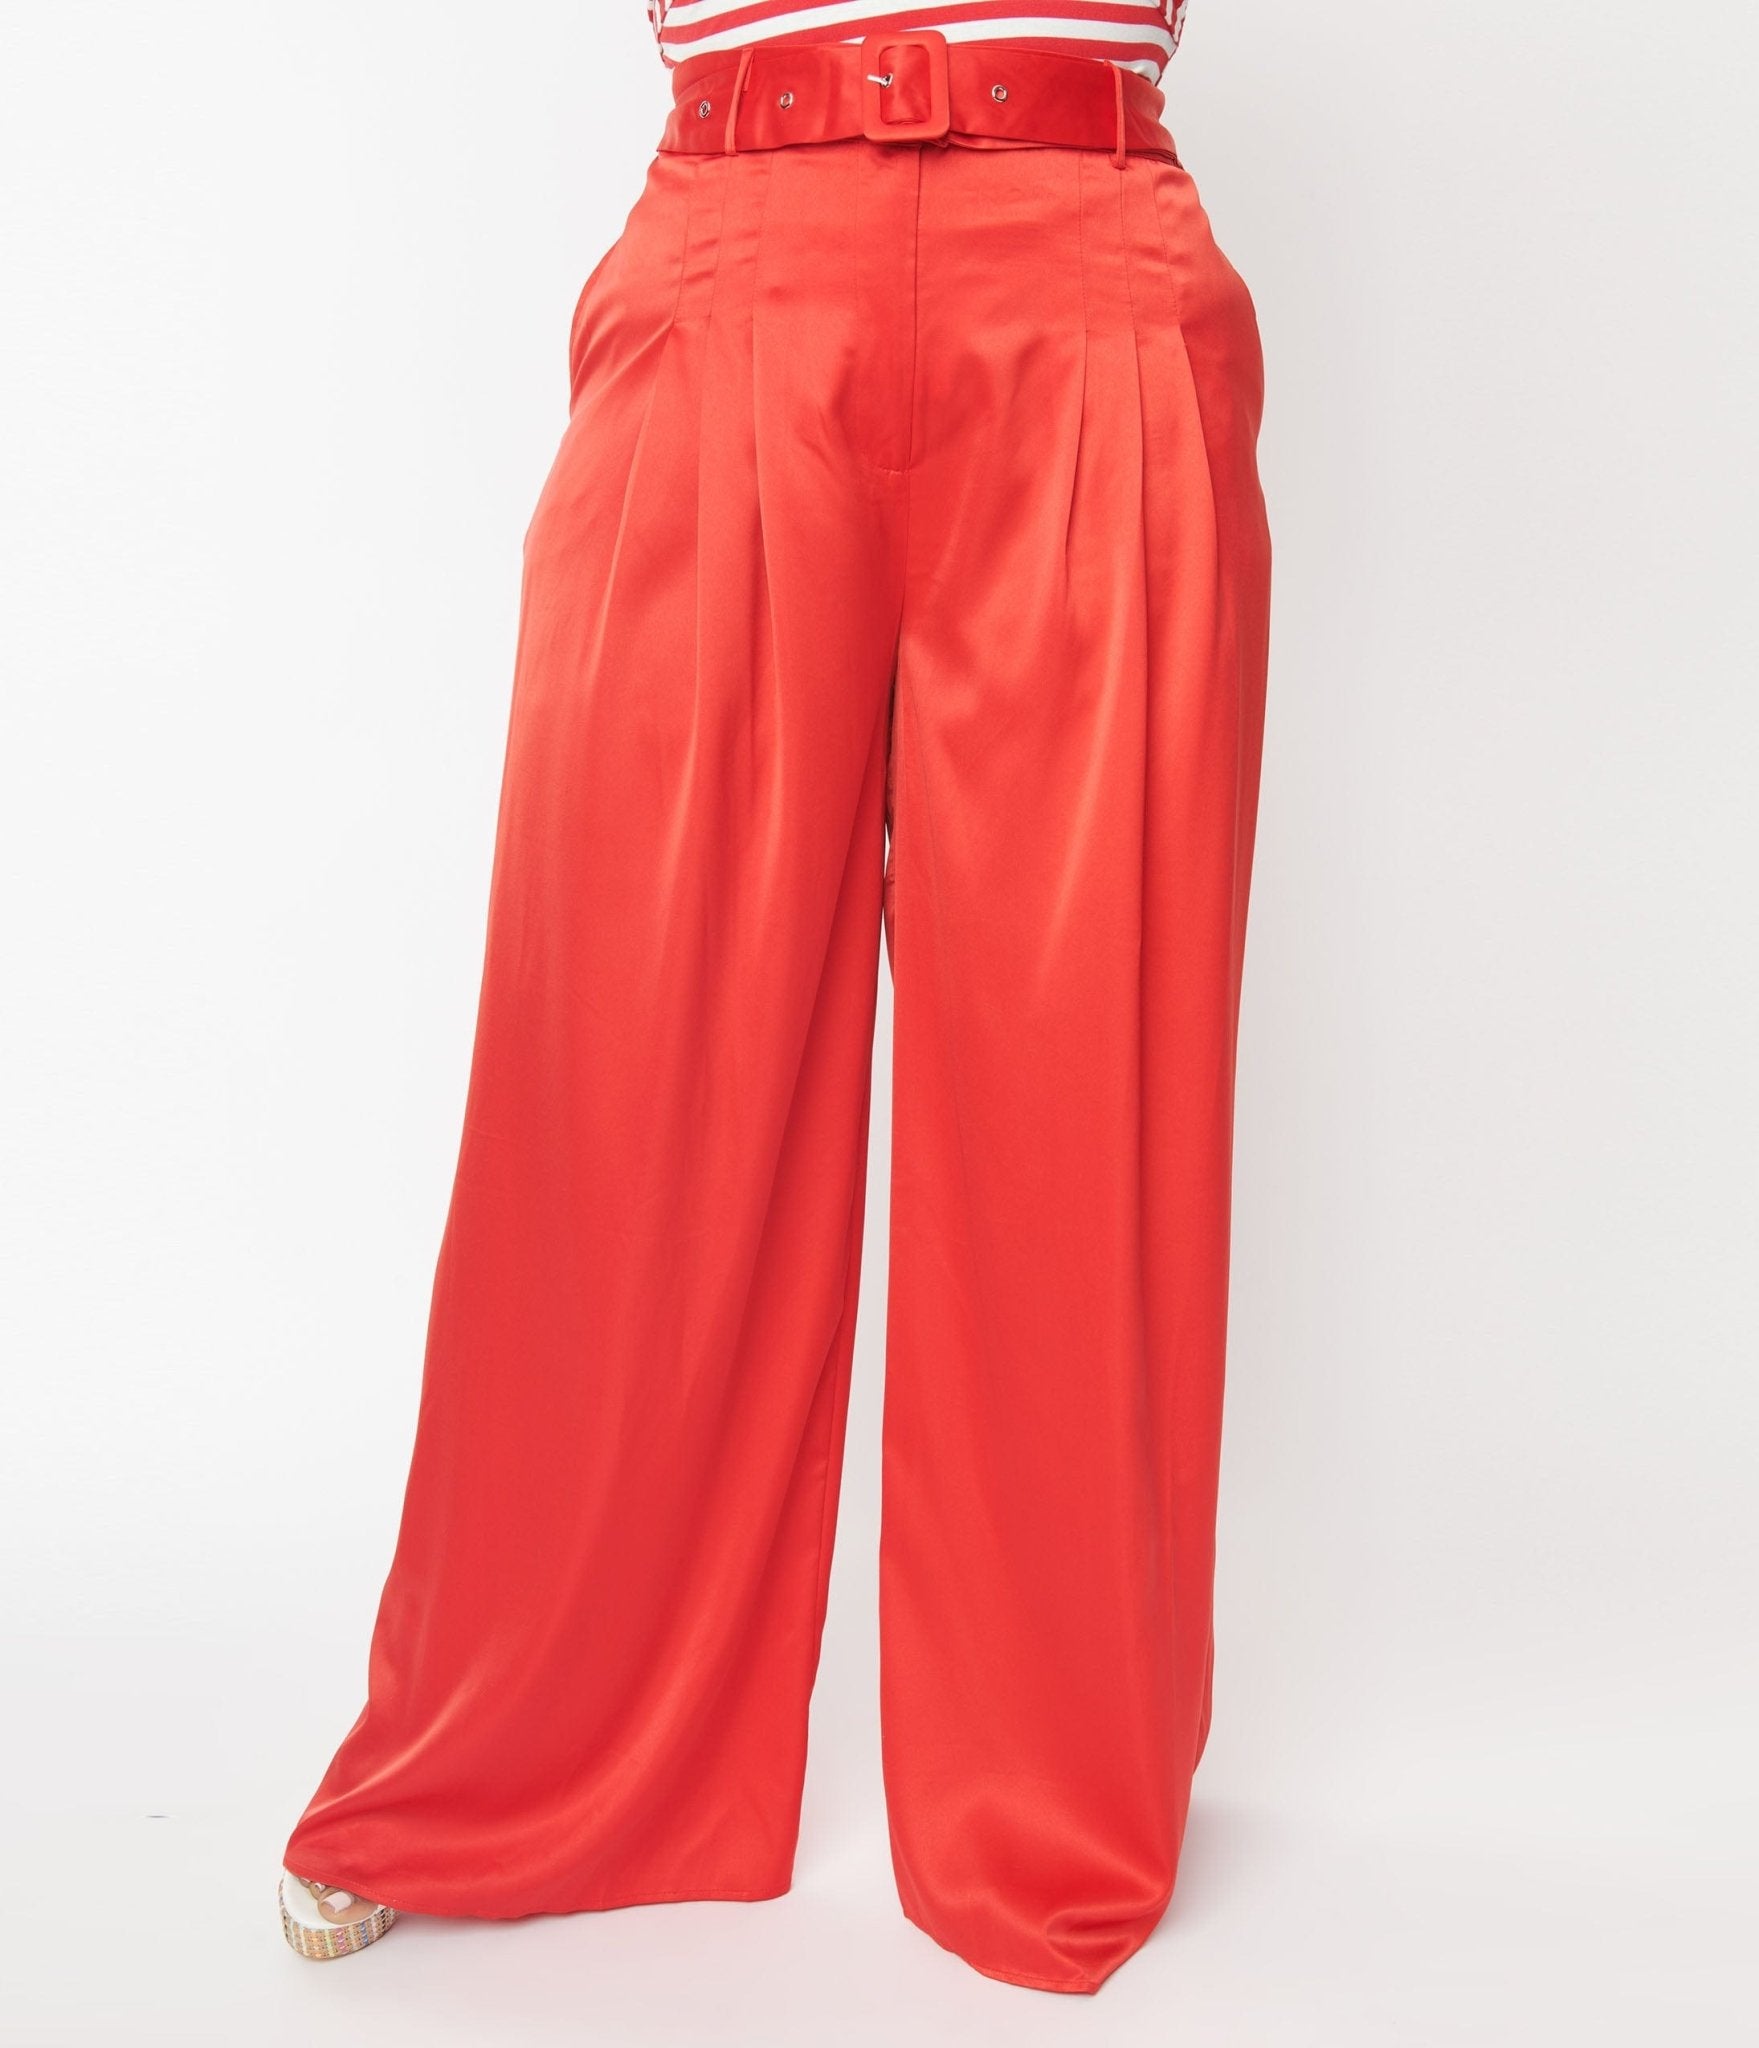 Plus Size - Red Structured Woven Wide Leg Pant - Torrid